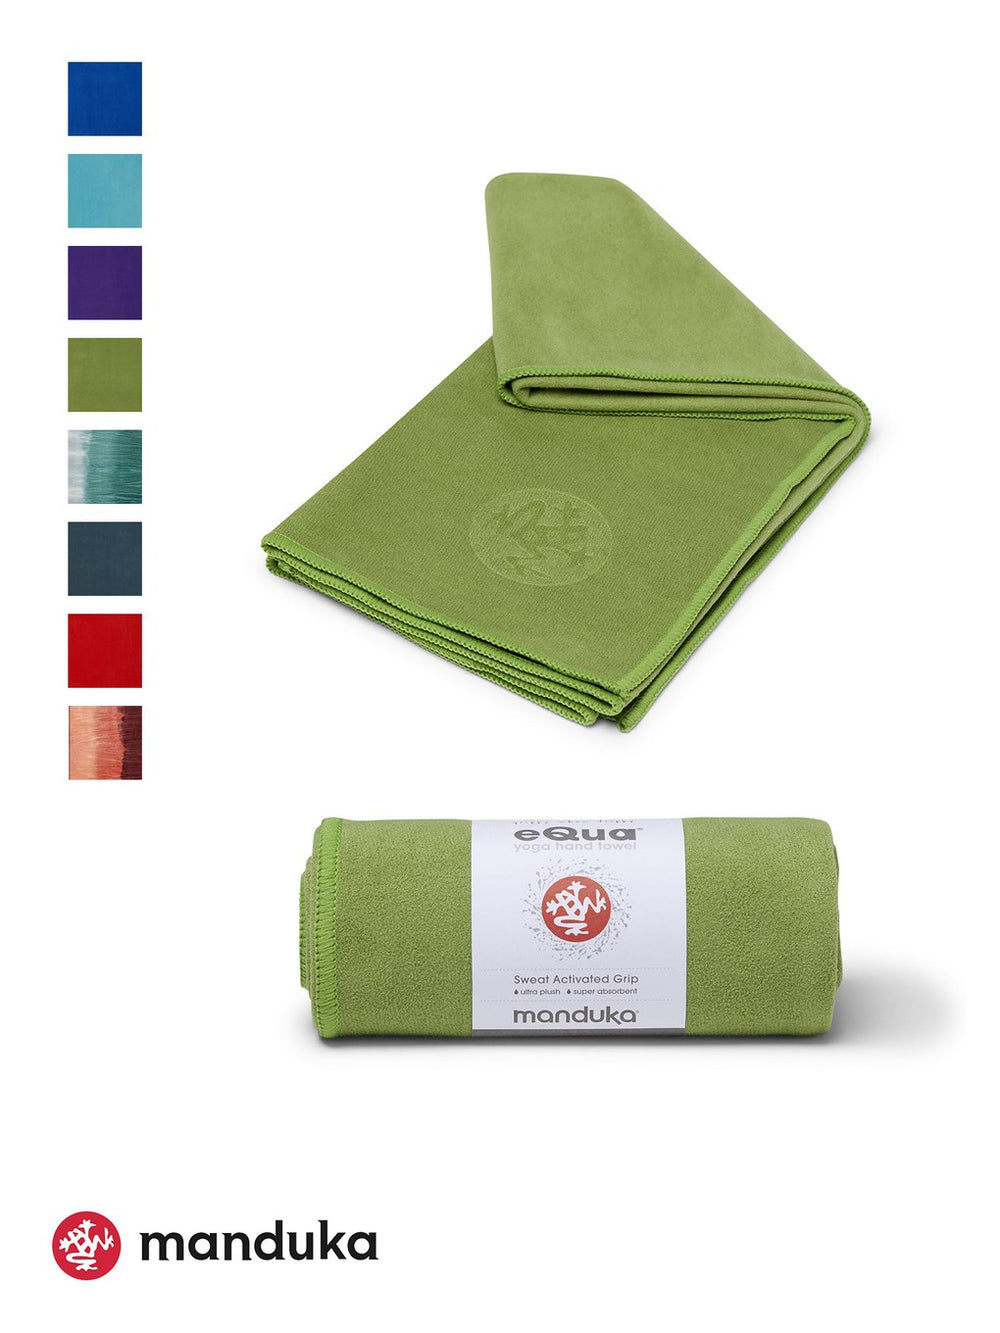 Absorbent, non-slip and quick drying, the eQua® Mat Towel spreads